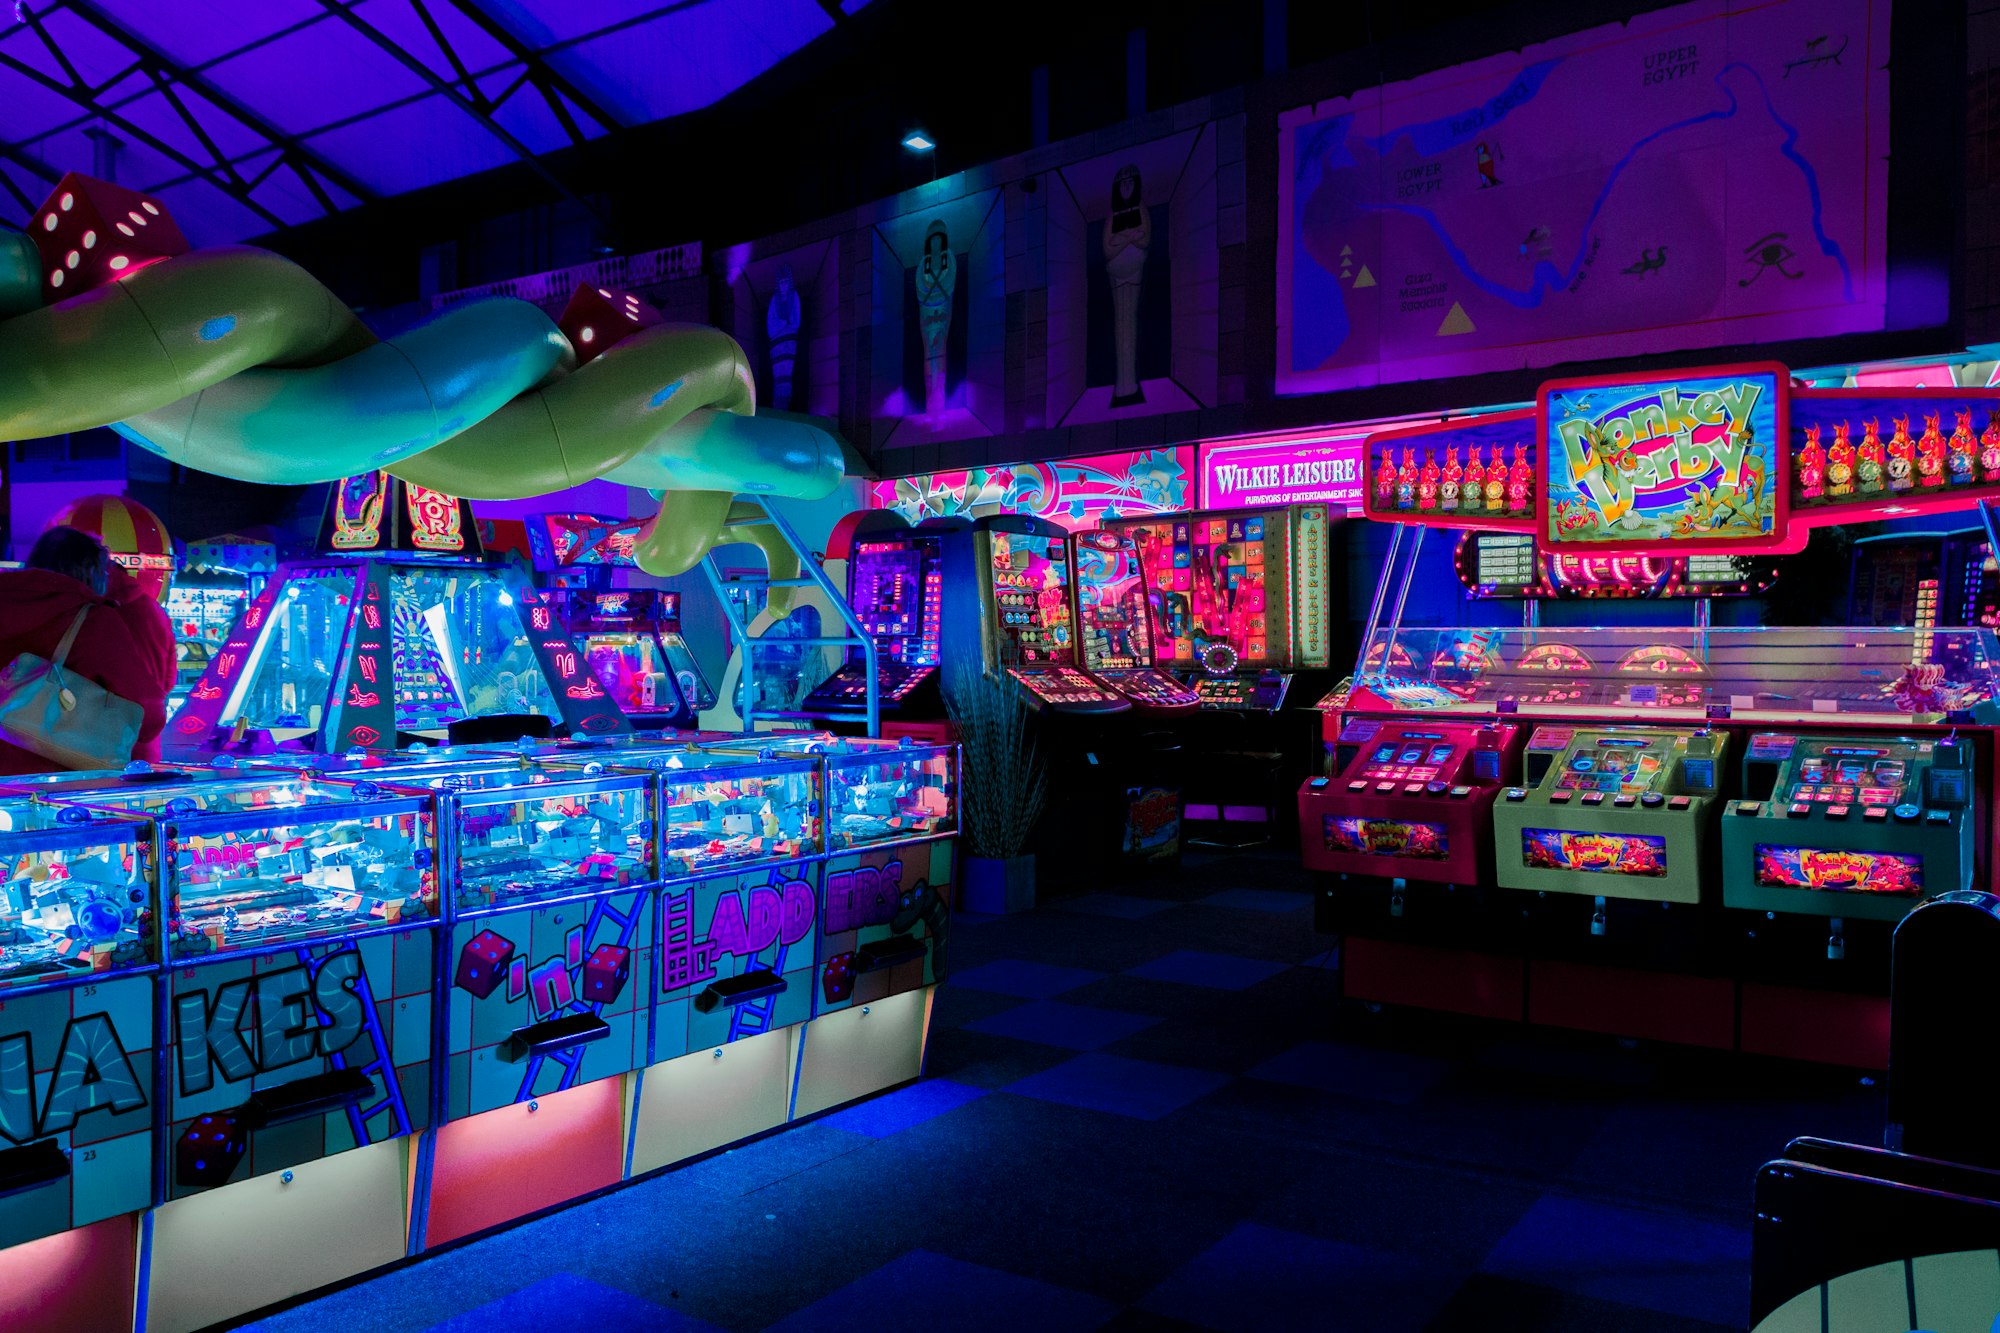 Whilst strolling through any arcades, always stop to take a photo and play around in Lightroom. You’ll be impressed.